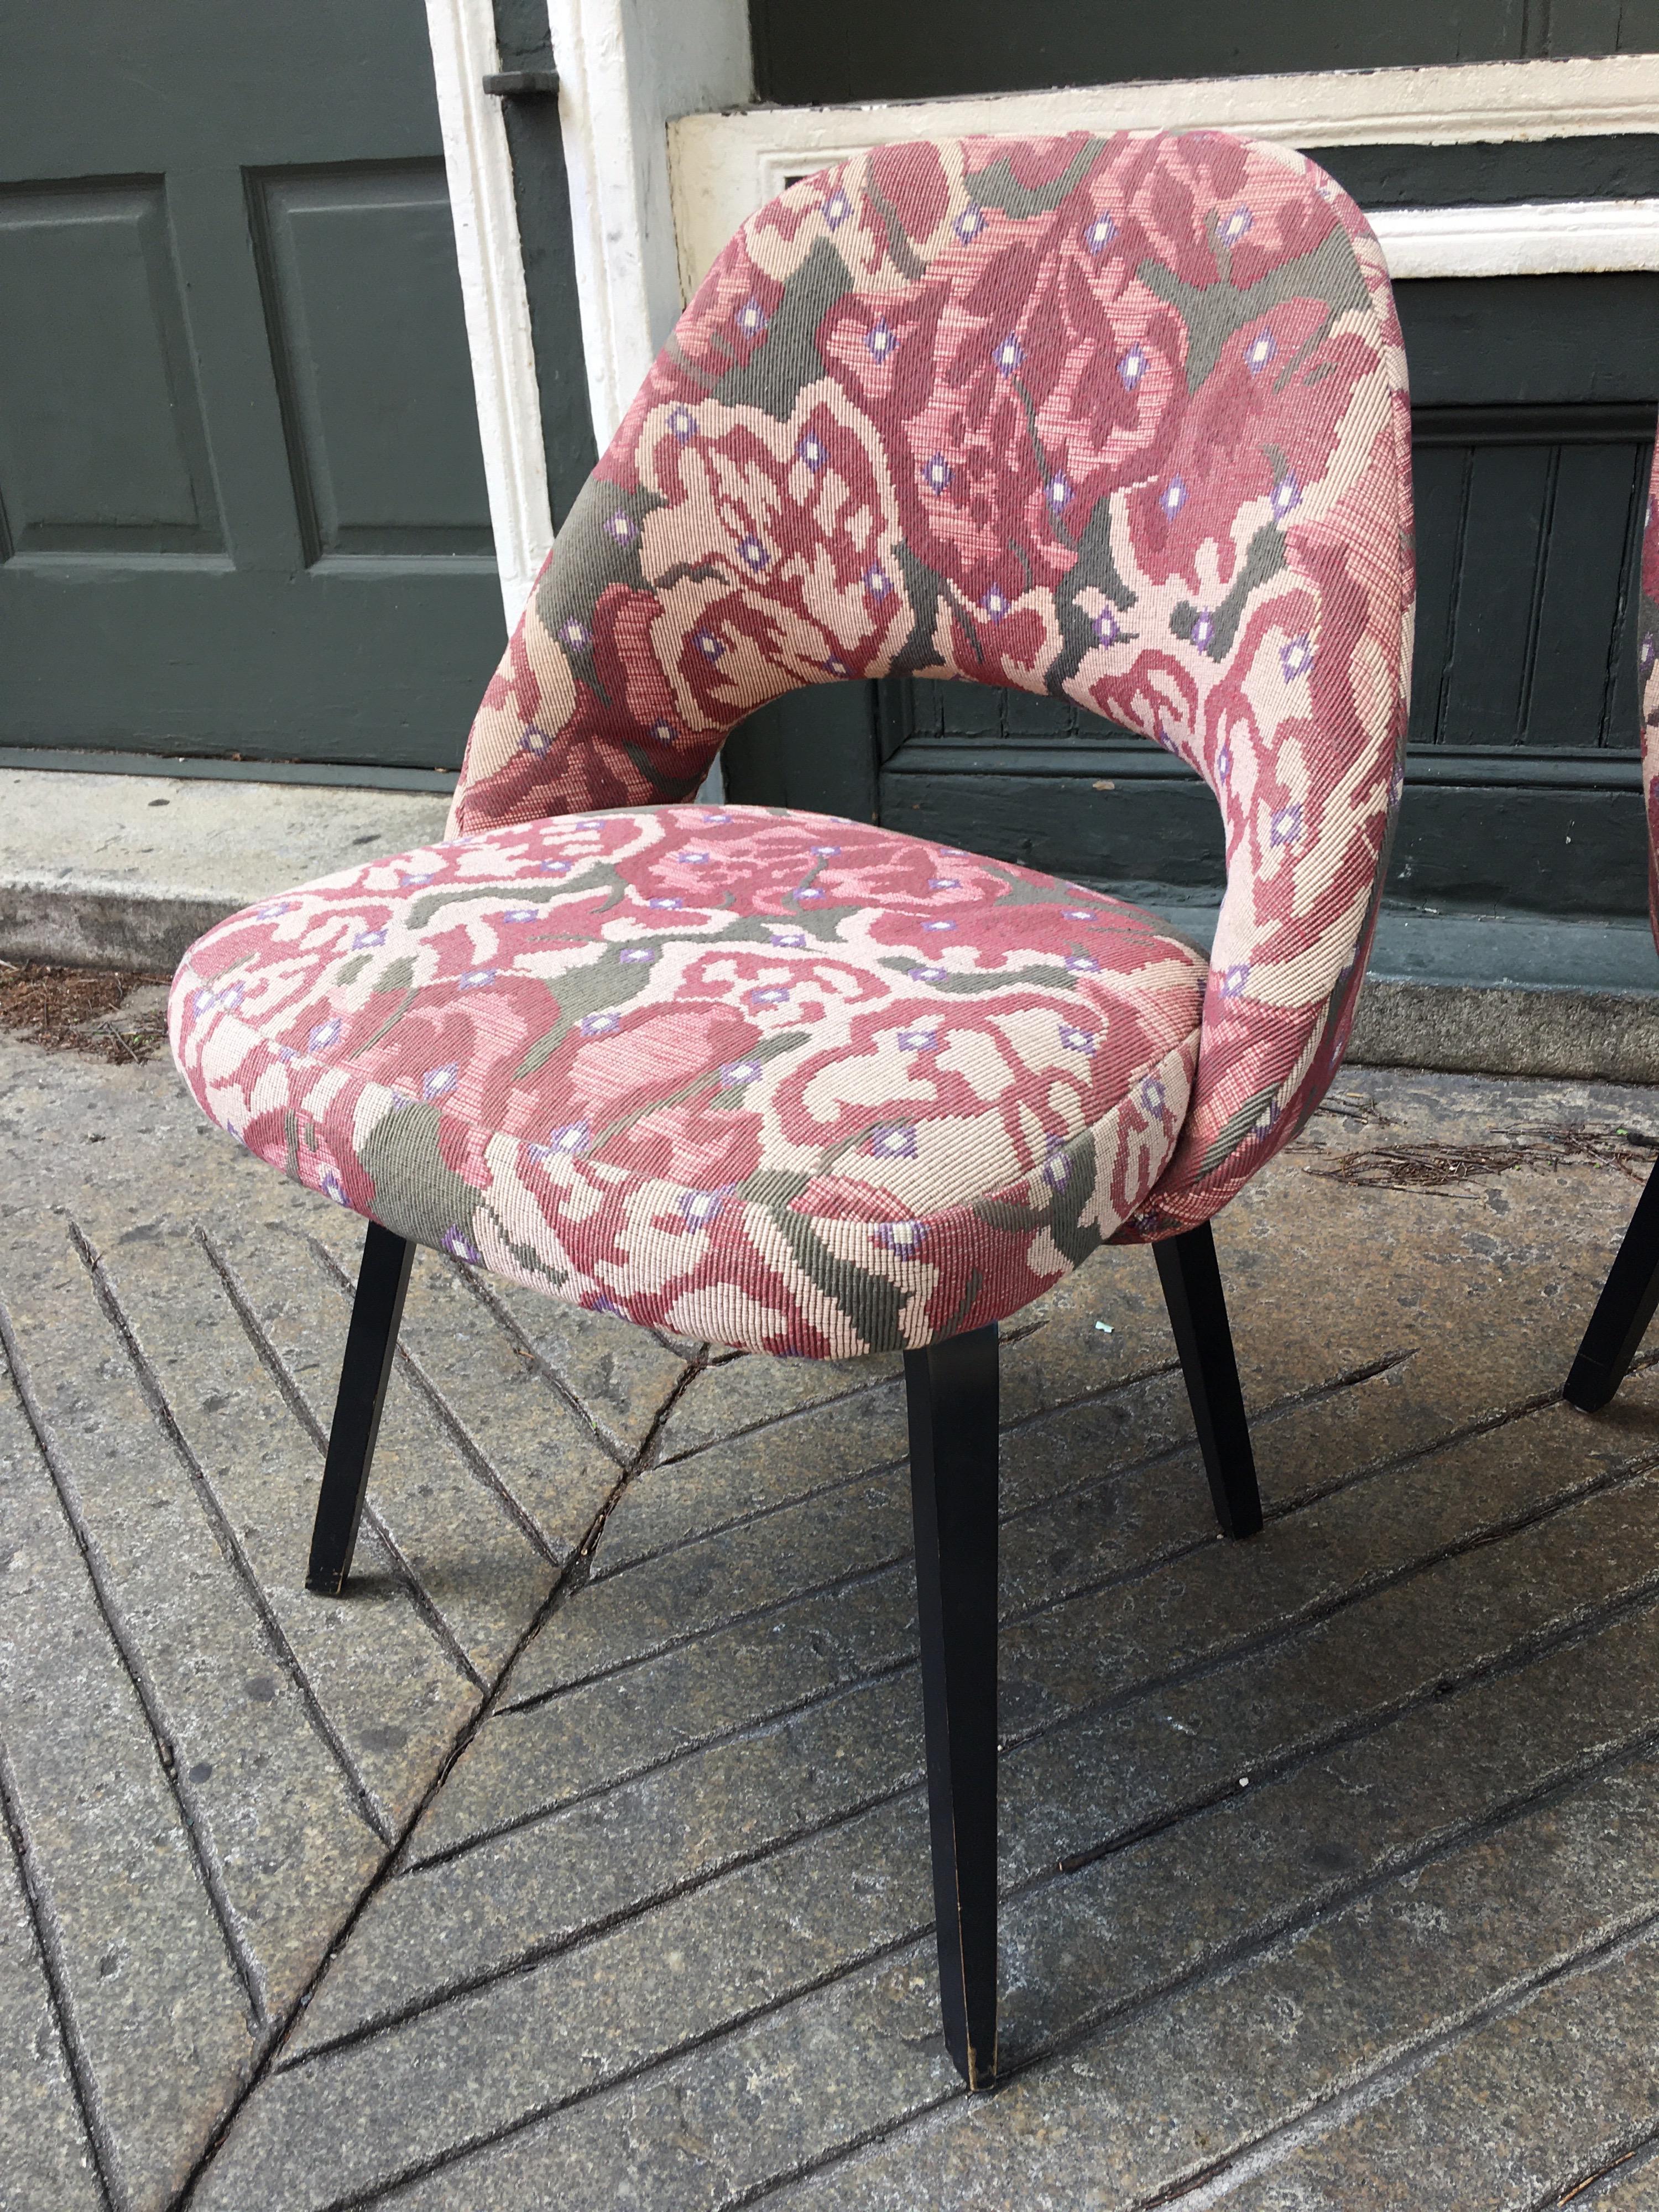 Pair of Eero Saarinen for Knoll executive side chairs with wooden legs. Legs were painted black at some point in their life, can still see the very early Knoll label. Chairs are solid and sort of fun with the floral Fabric! Use as is or reupholster!